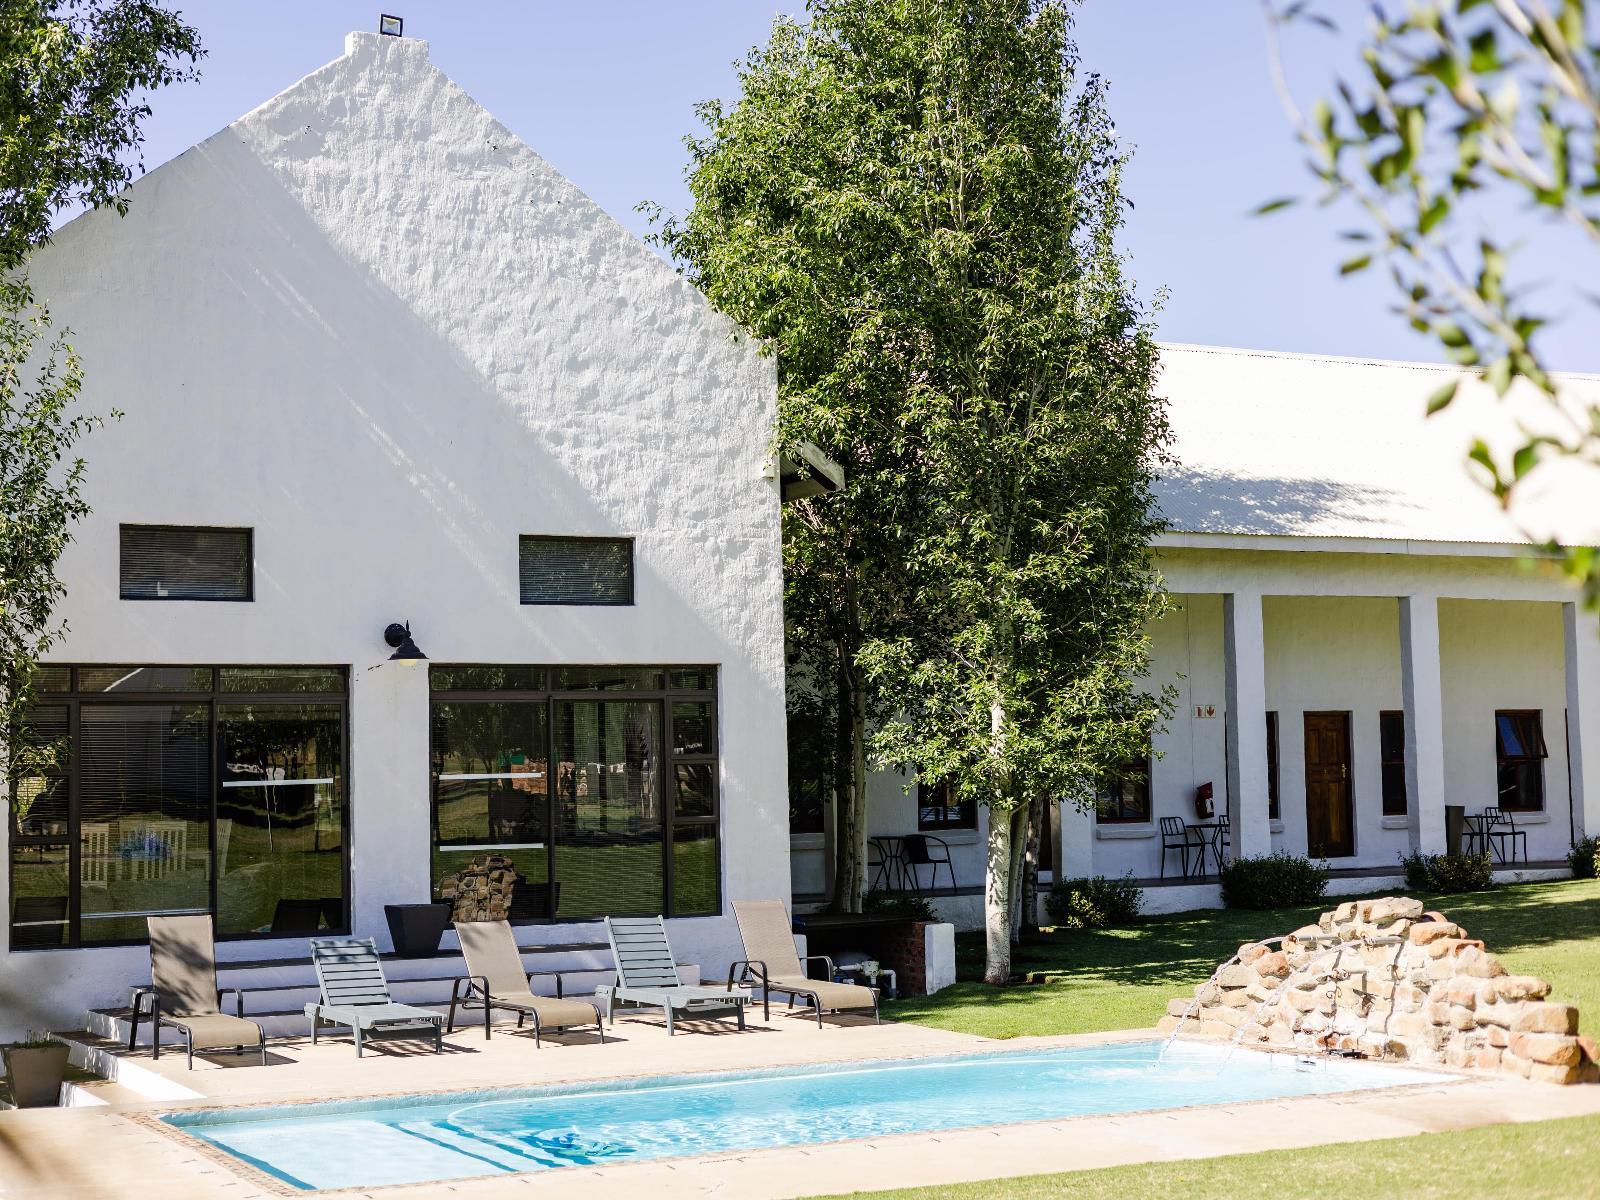 Mont D Or Monte Bello Estate Bayswater Bloemfontein Free State South Africa House, Building, Architecture, Swimming Pool